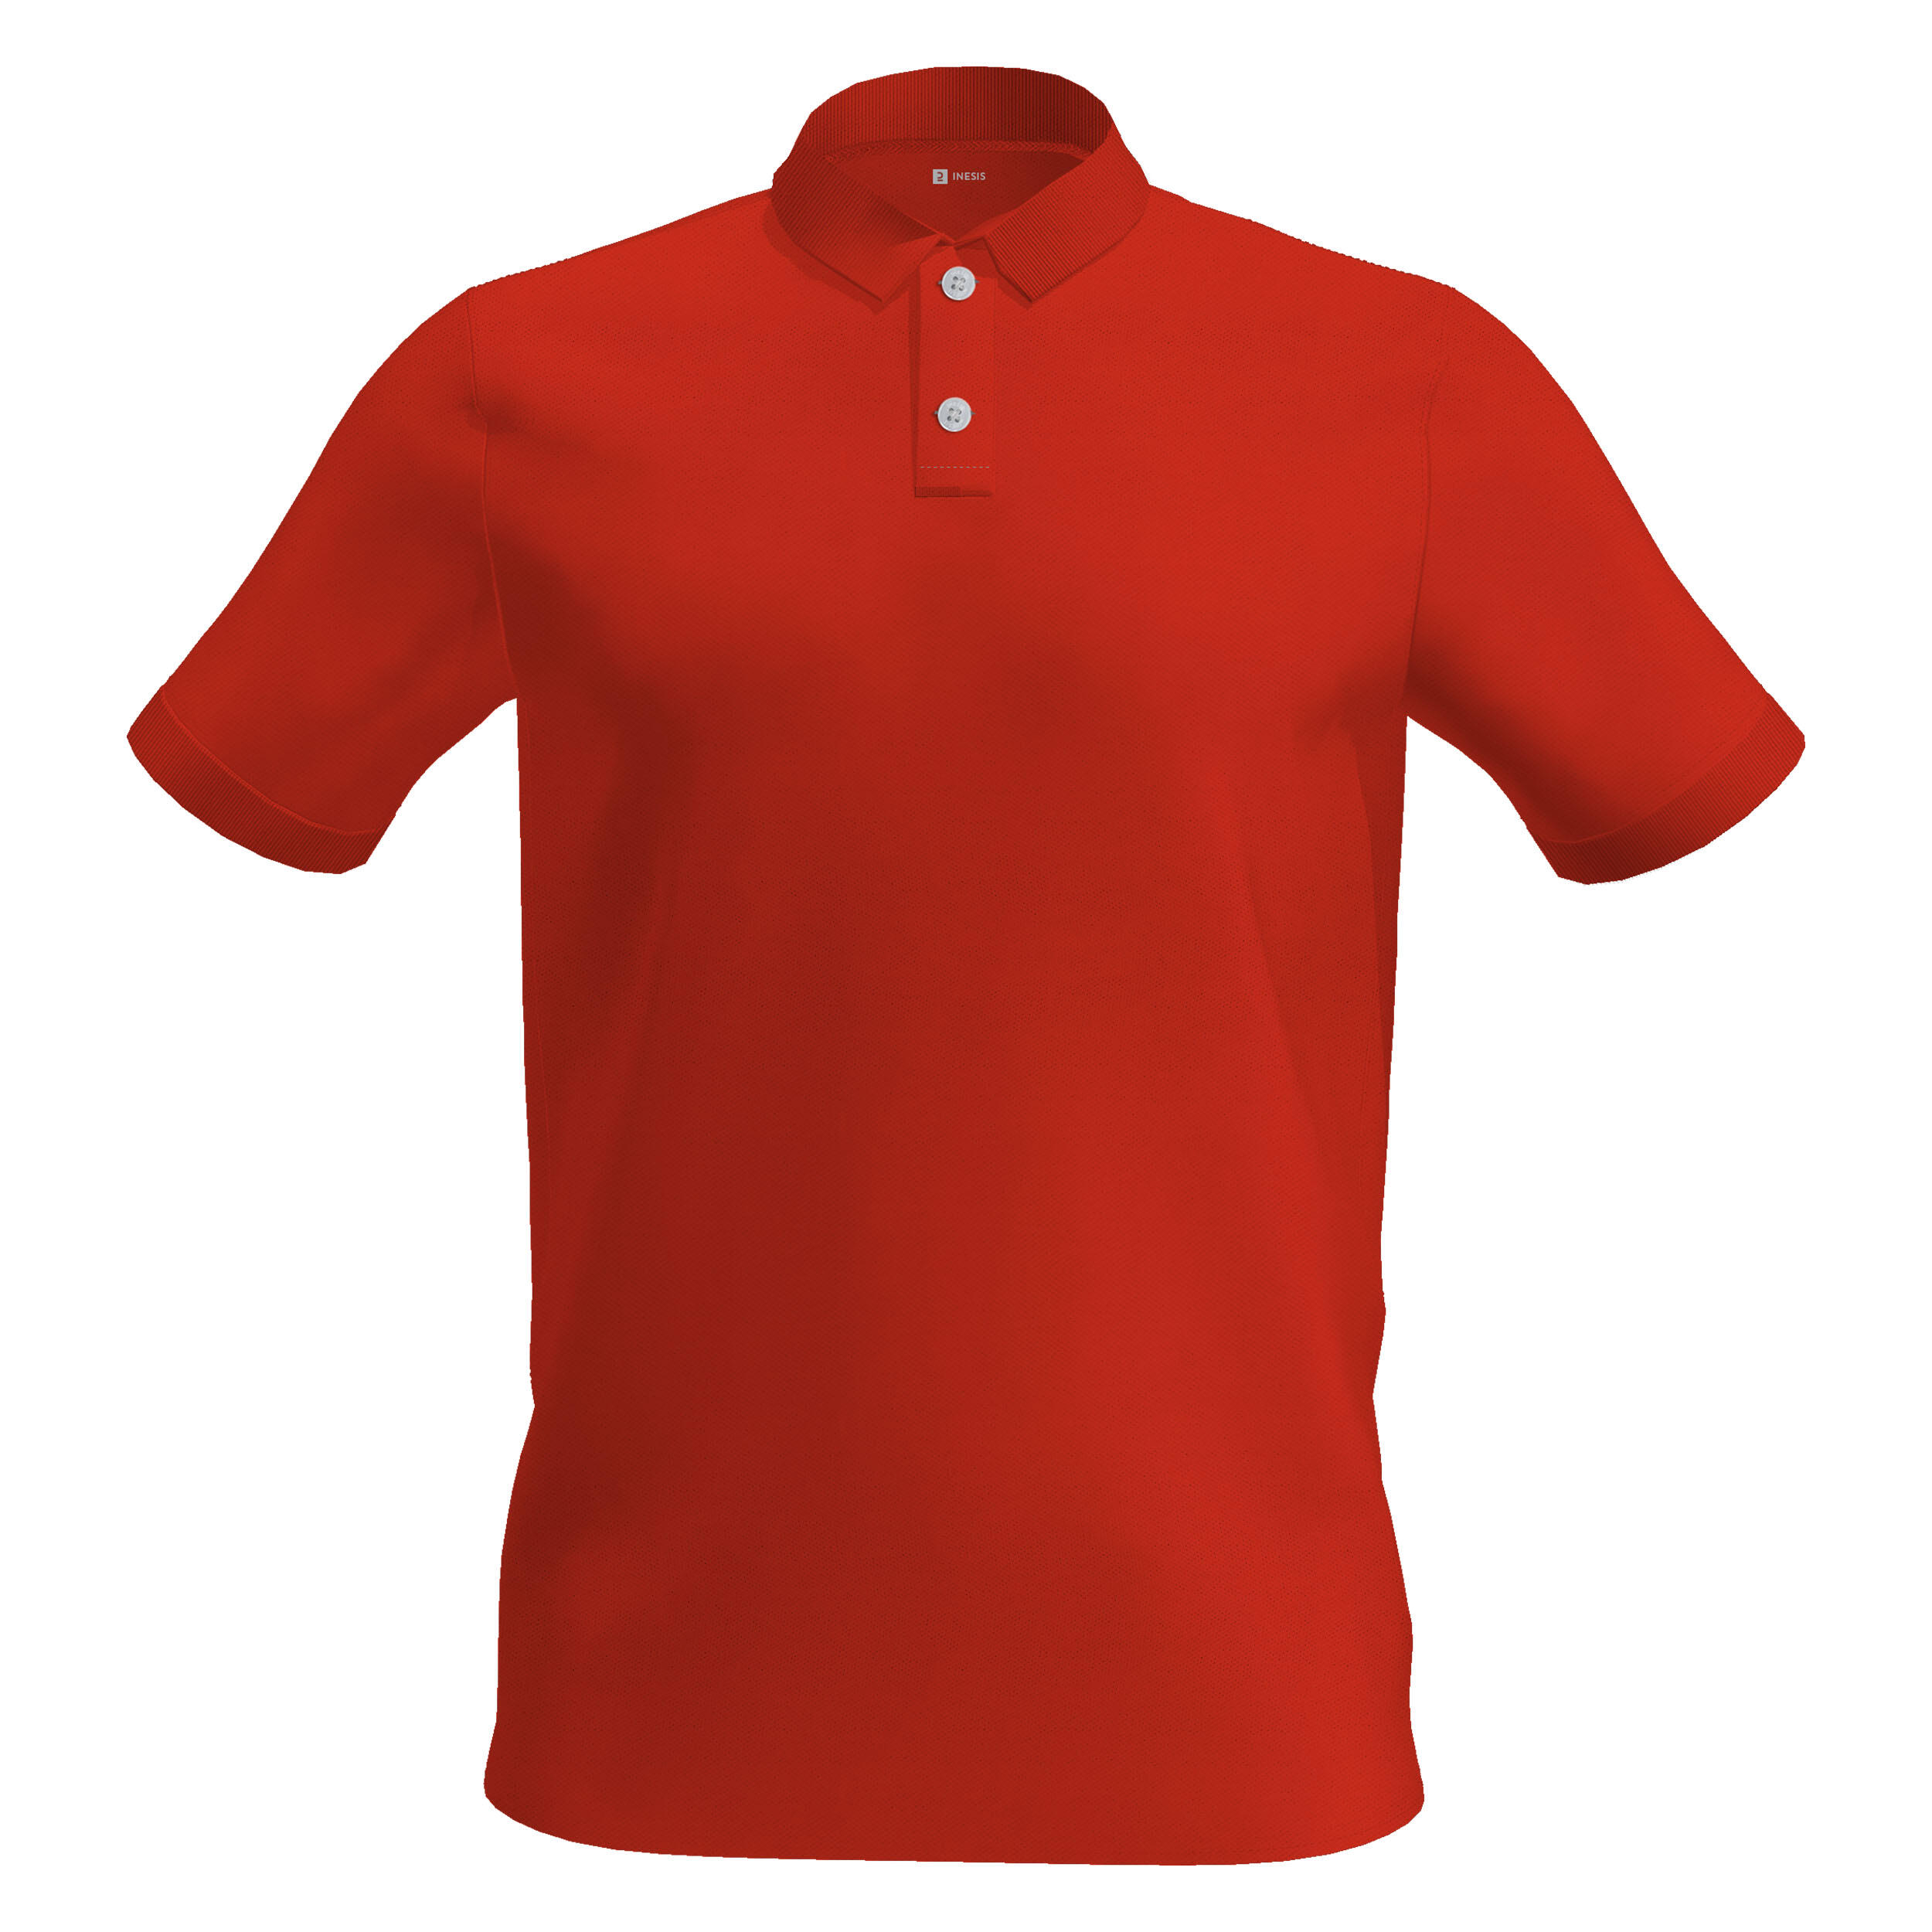 Red Polo Shirt Template Stock Illustration Download Image Now Red, Polo ...